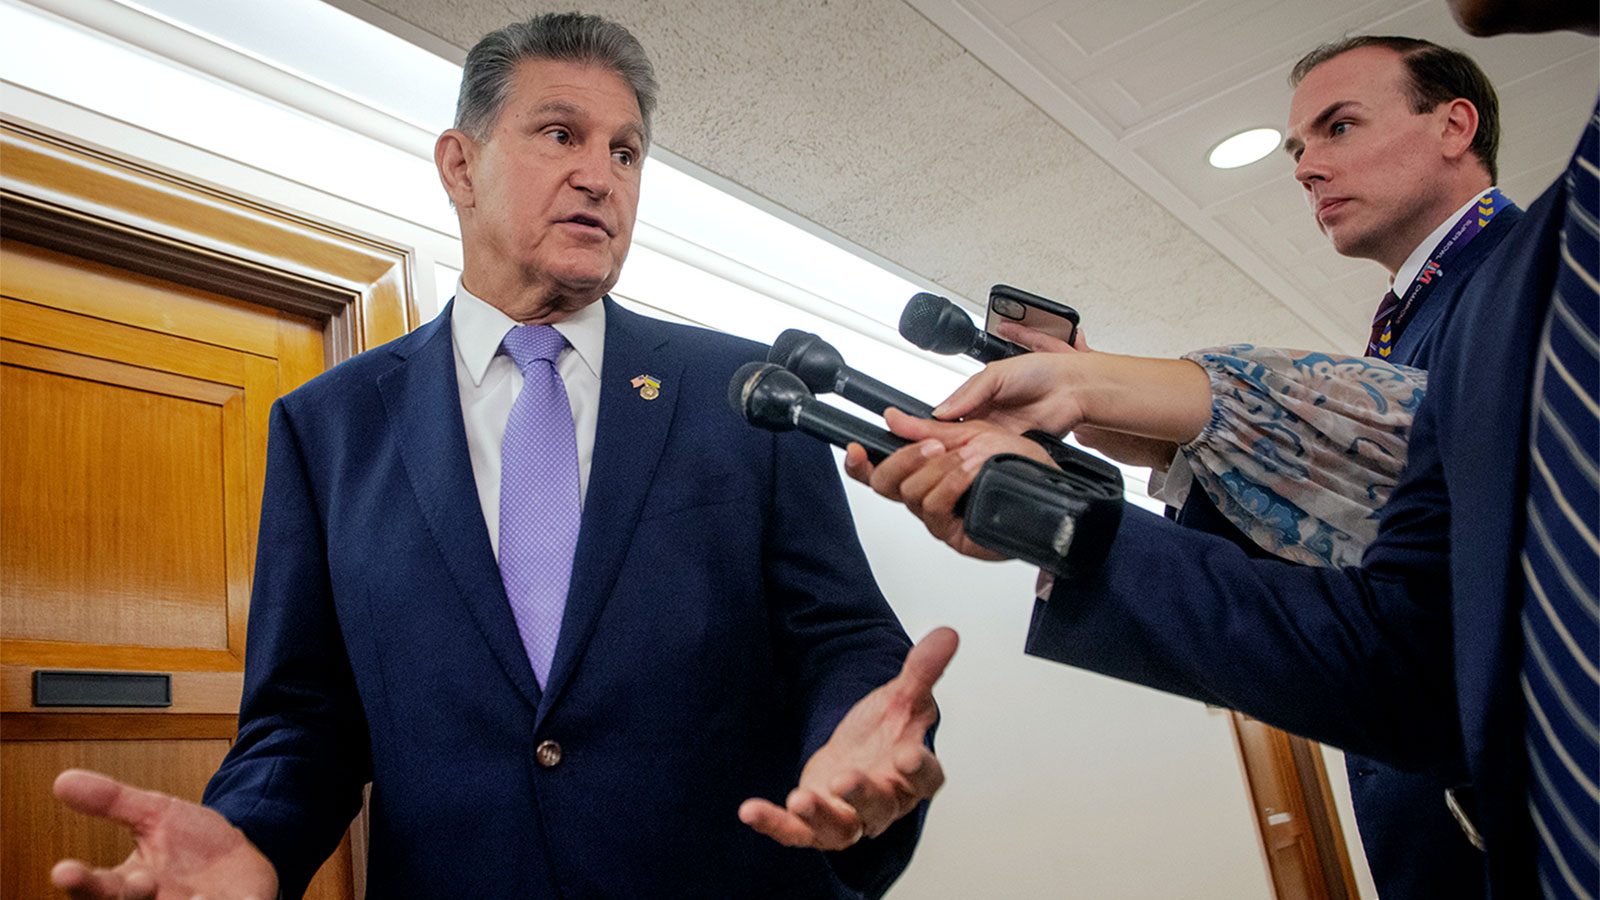 Reporters holding microphones out to Senator Joe Manchin, speaking with his hands raised in a half shrug